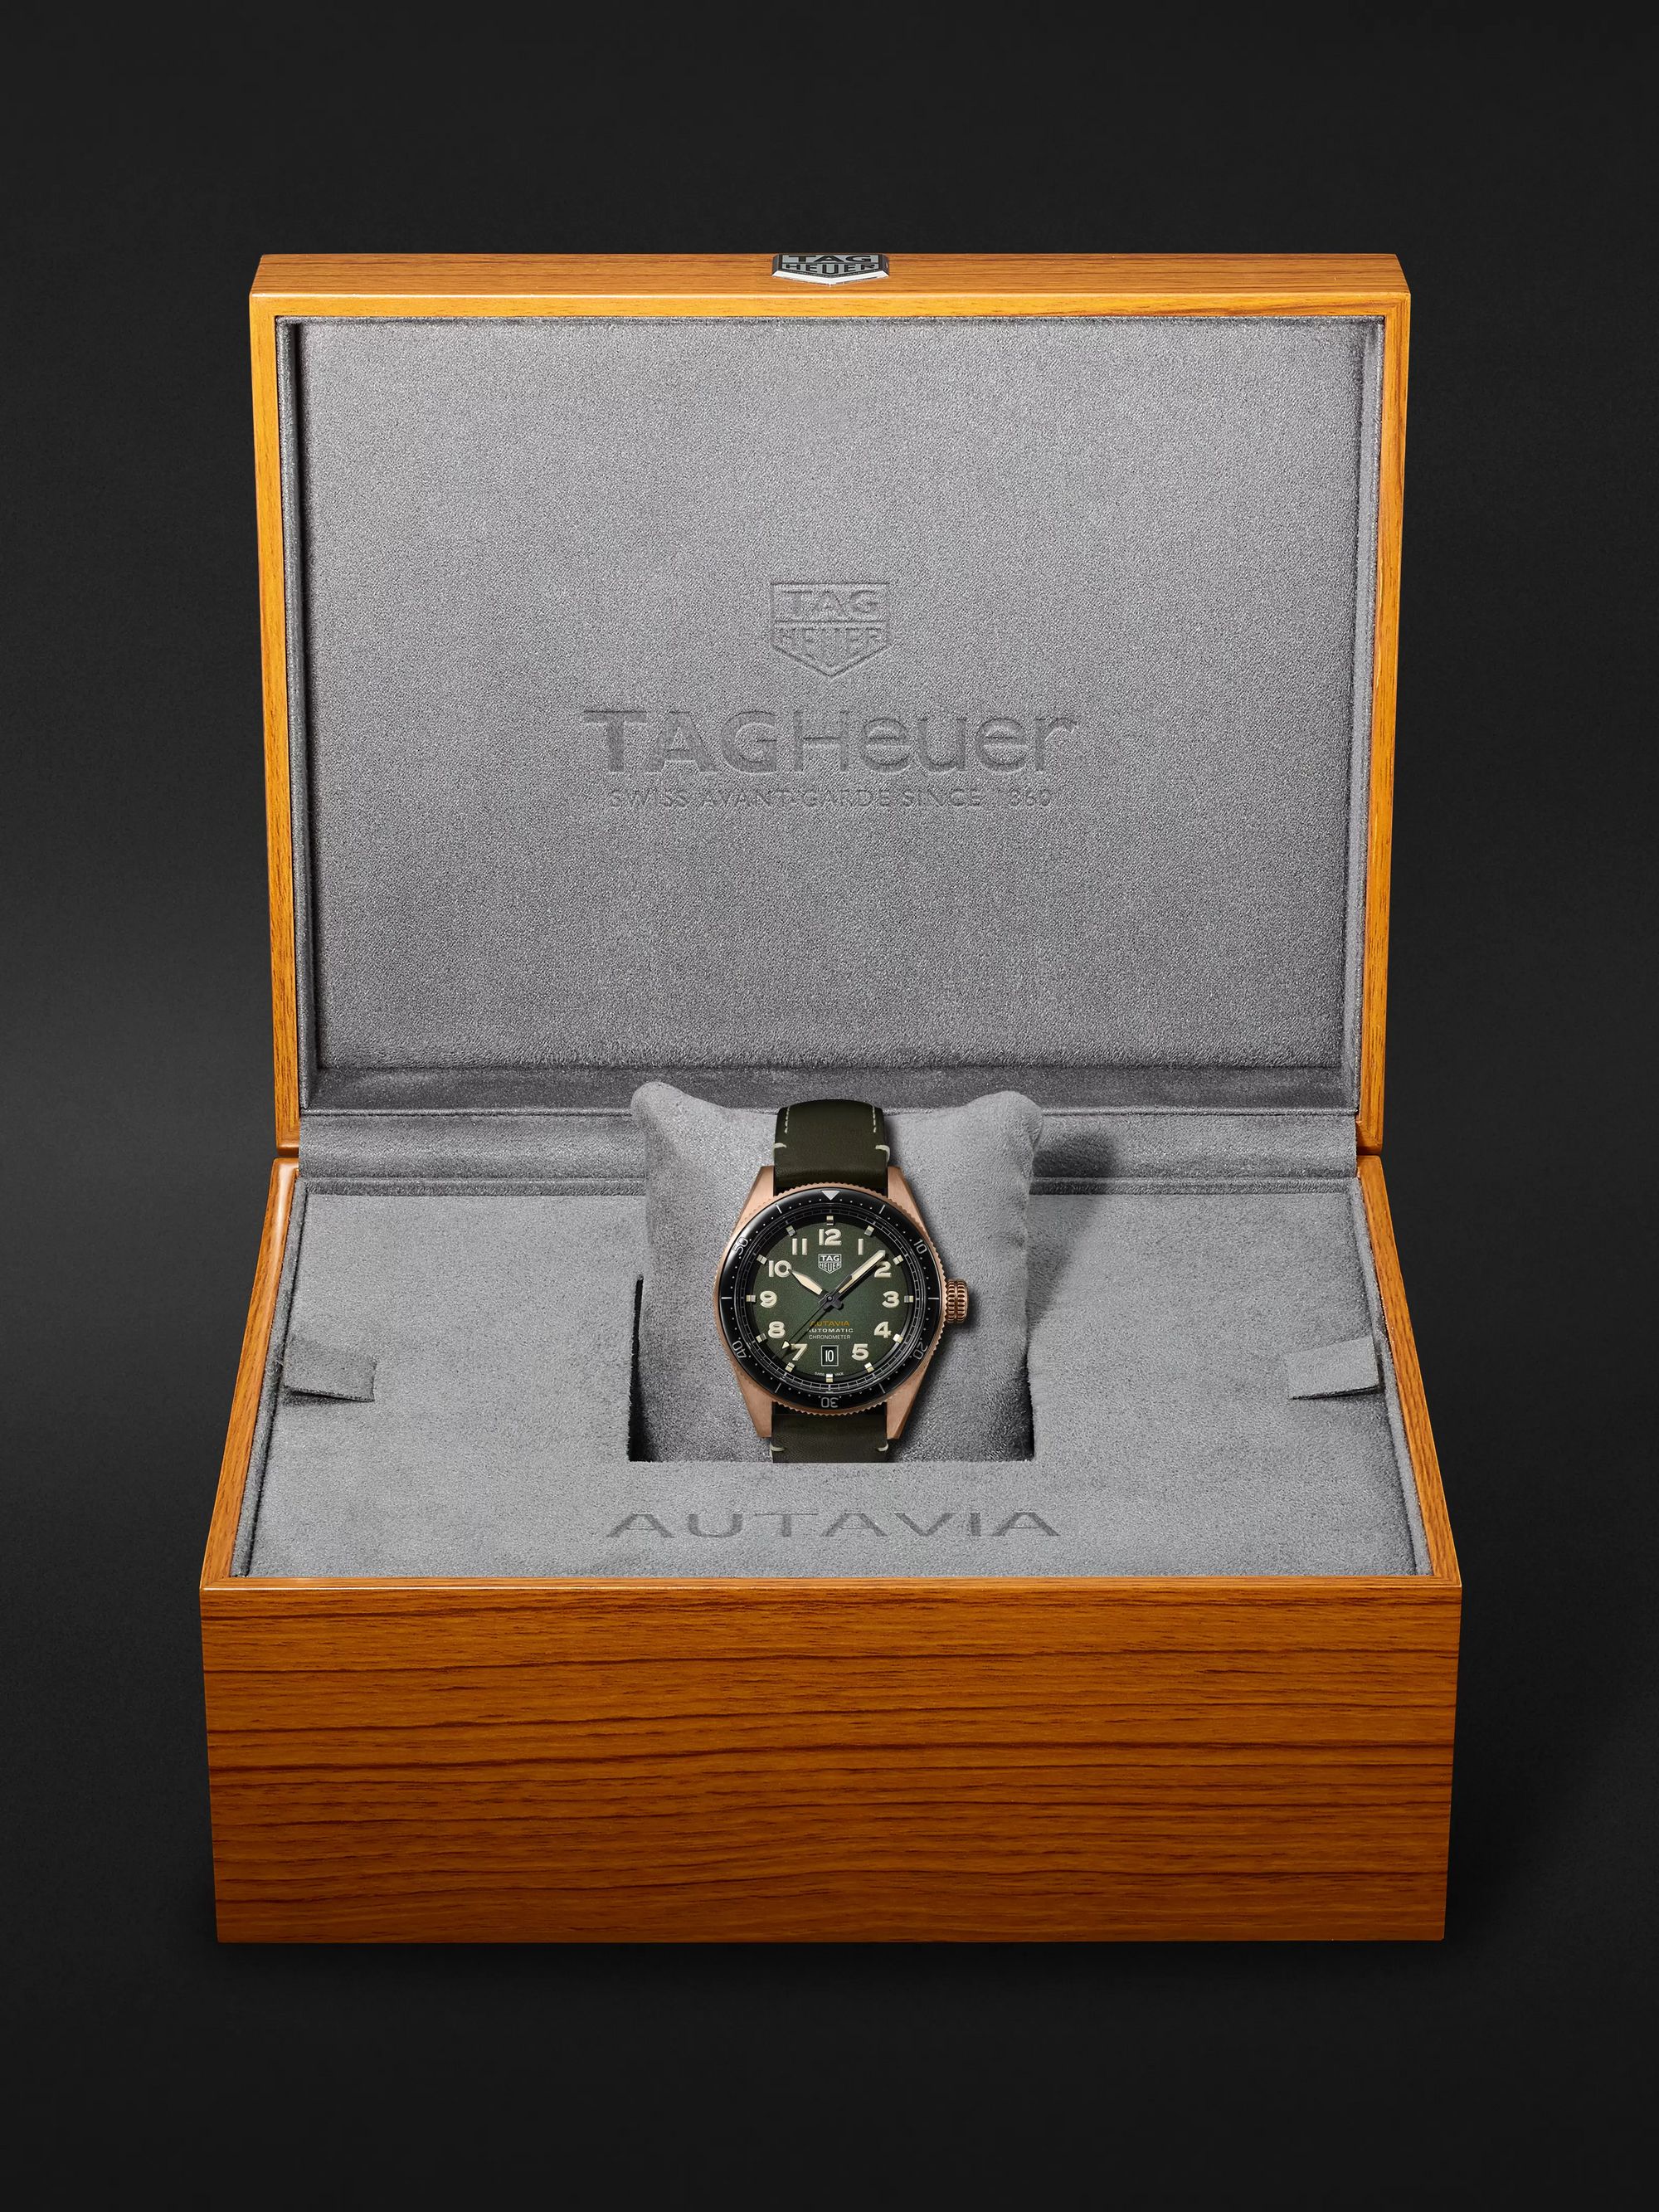 TAG Heuer Autavia Automatic Chronometer 42mm Bronze and Leather Watch, Ref. No. WBE5190.FC8268